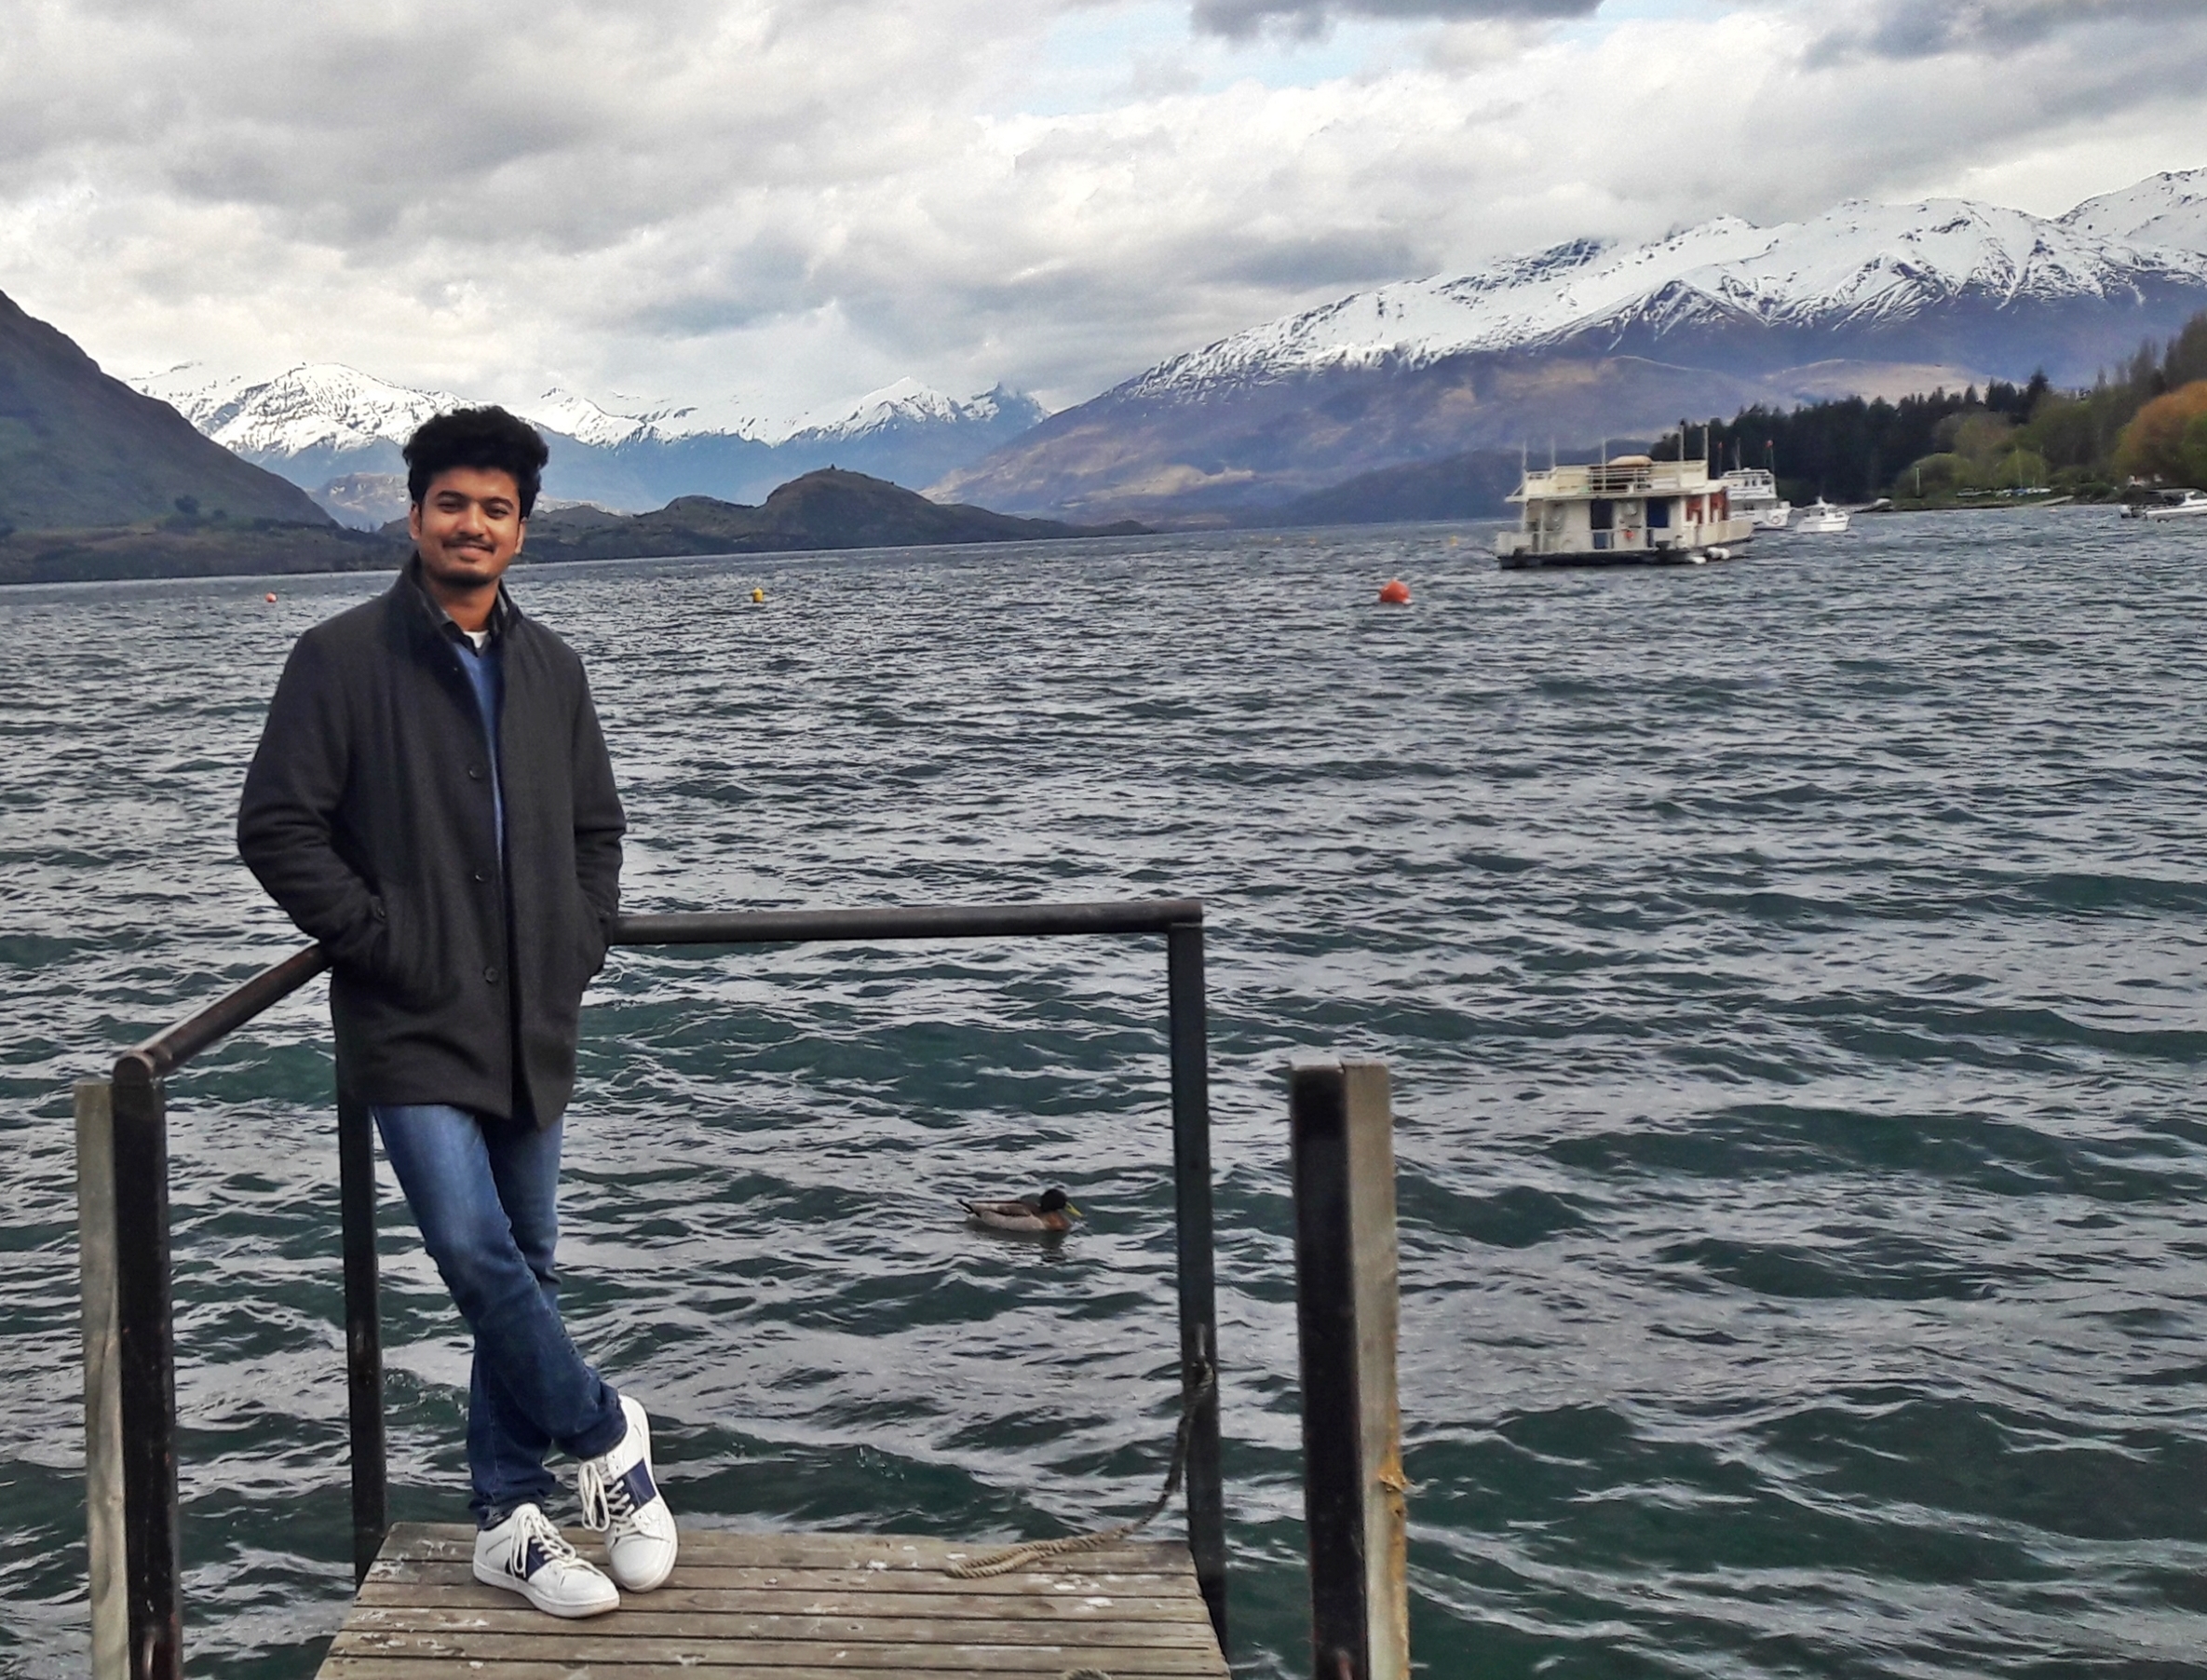 Lake Wanaka in New Zealand provides for a scenic stop along the way